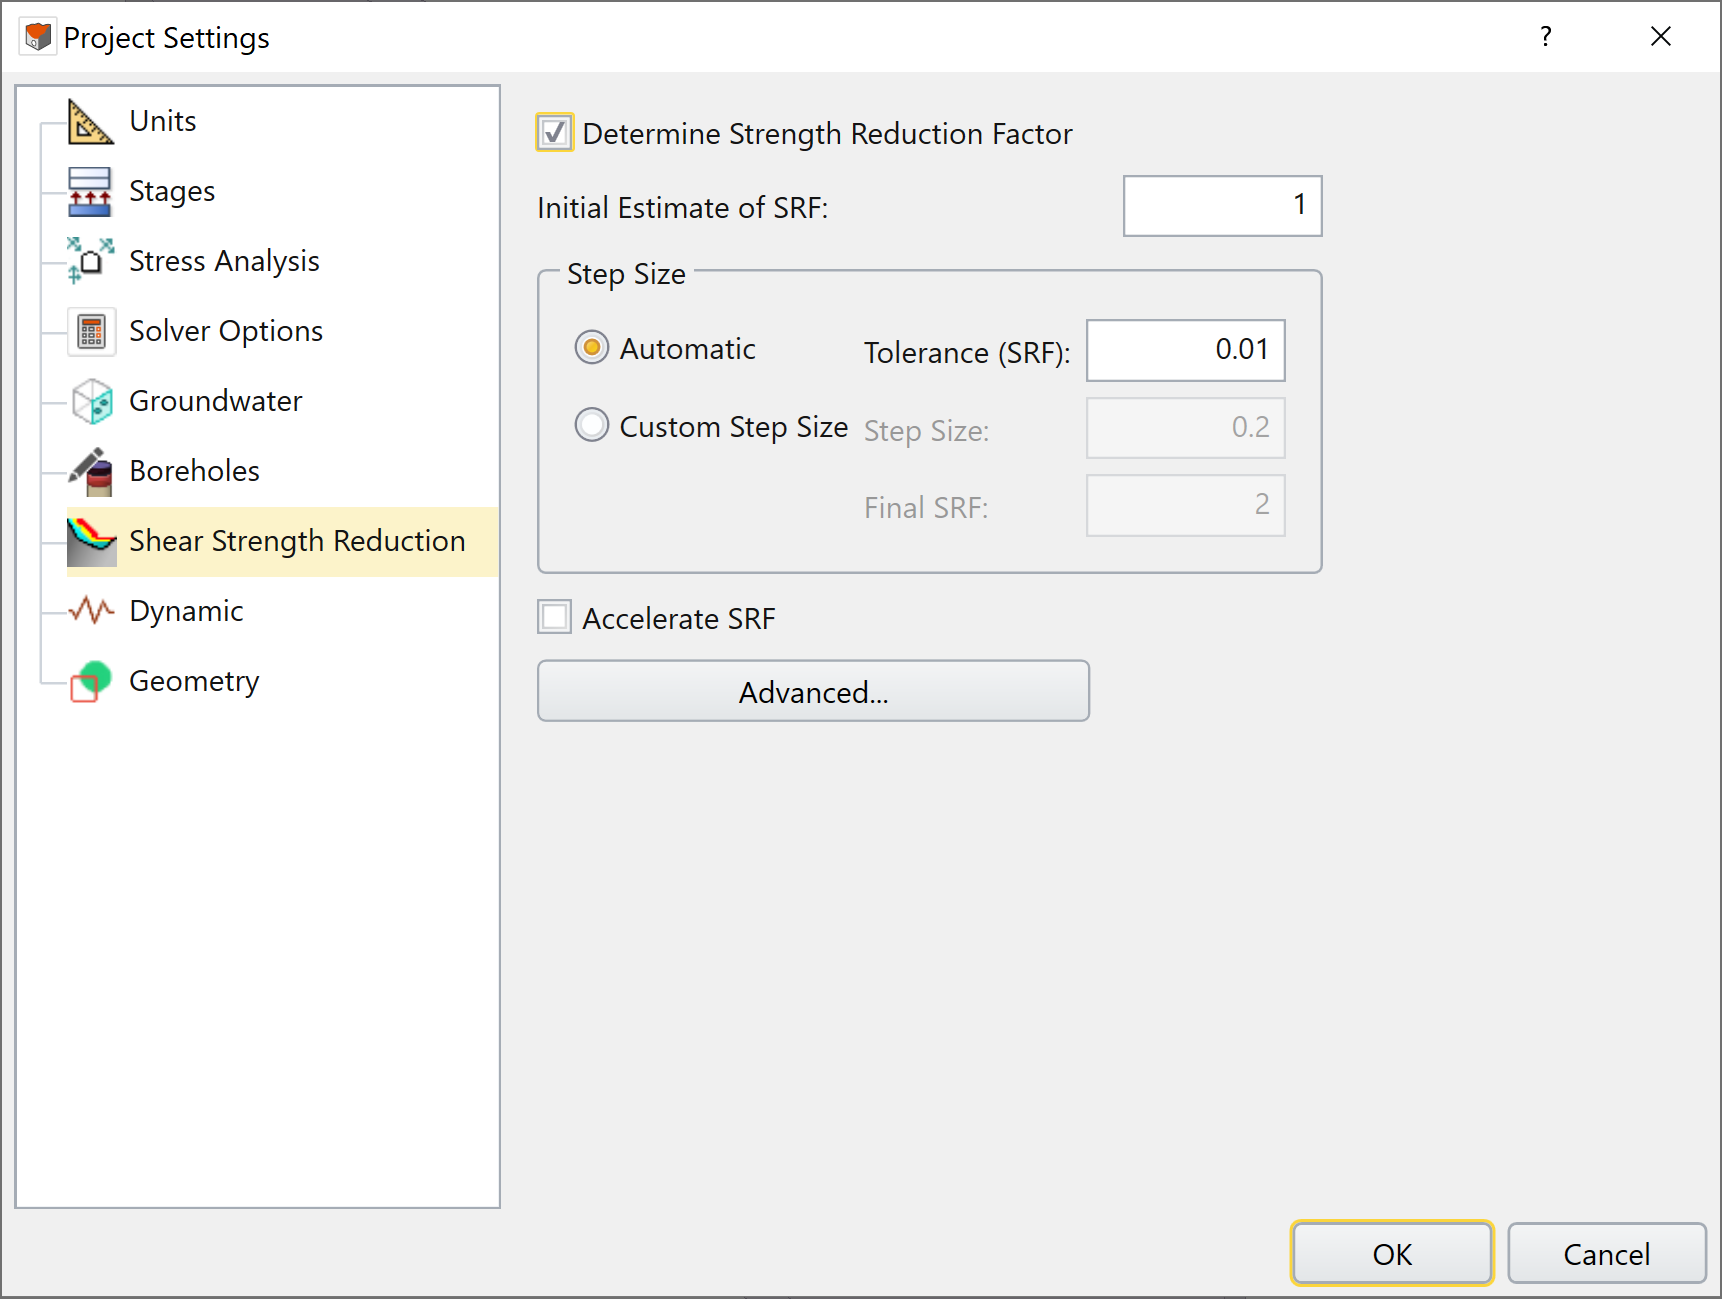 Project Settings dialog with Determine Strength Reduction Factor checkbox selected